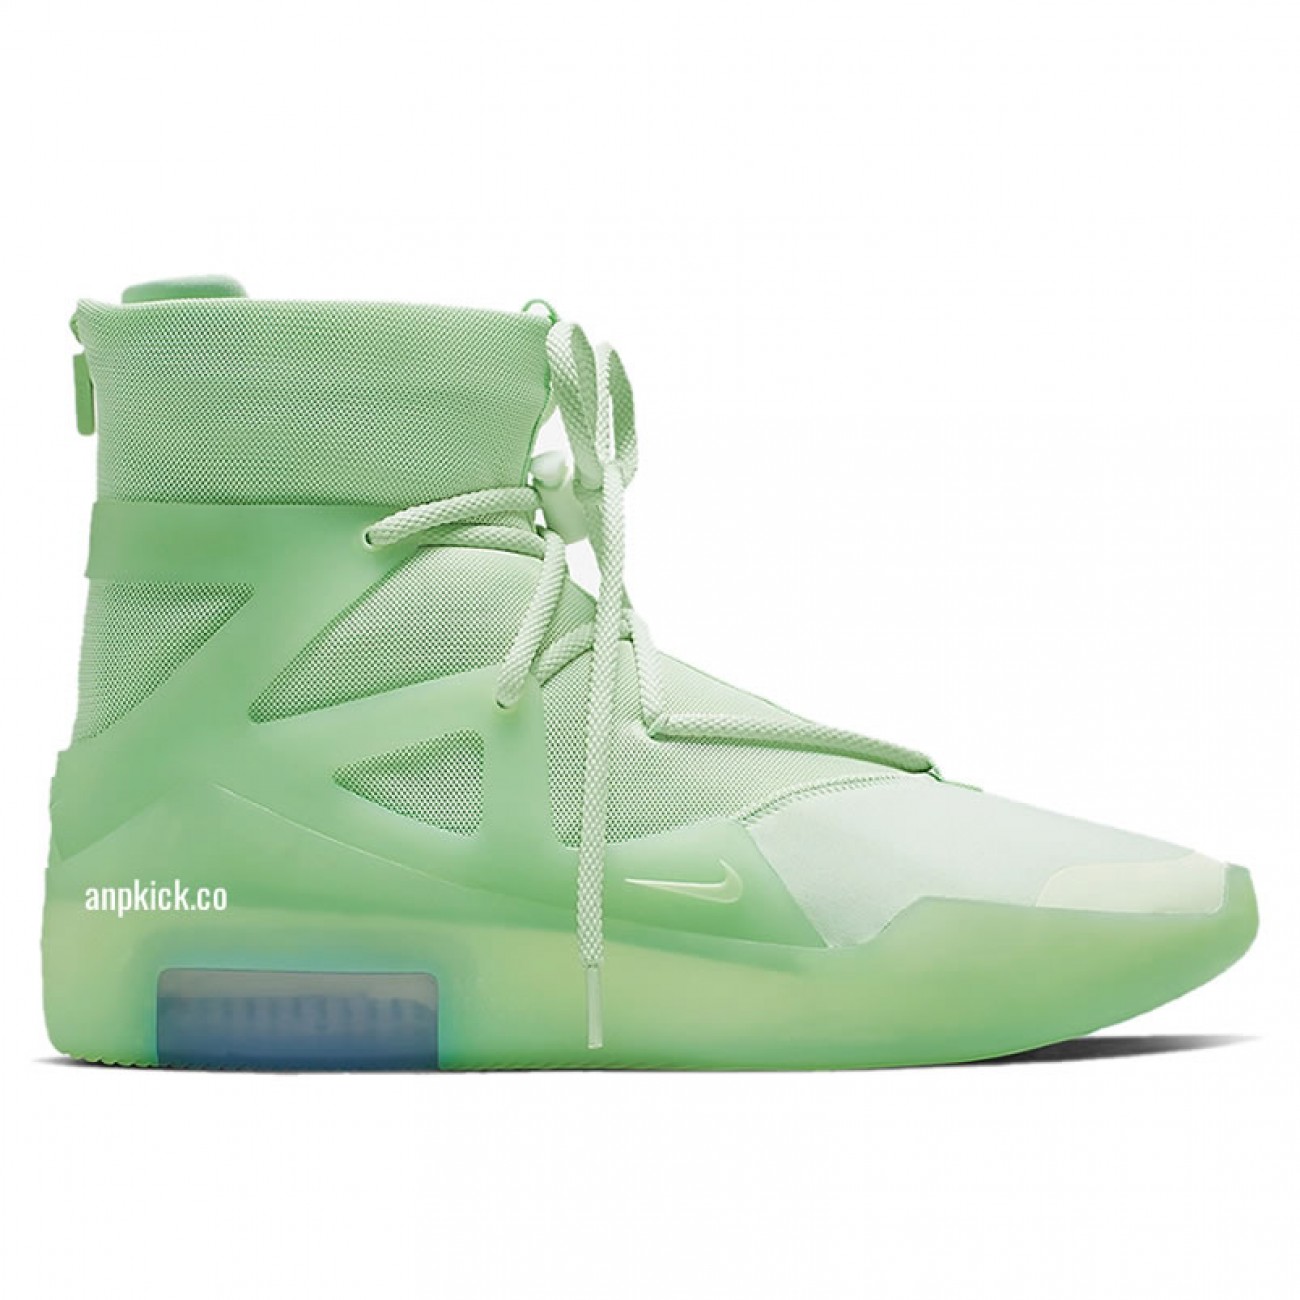 Nike Air Fear of God 1 "Frosted Spruce" FOG Green Outfit AR4237-300